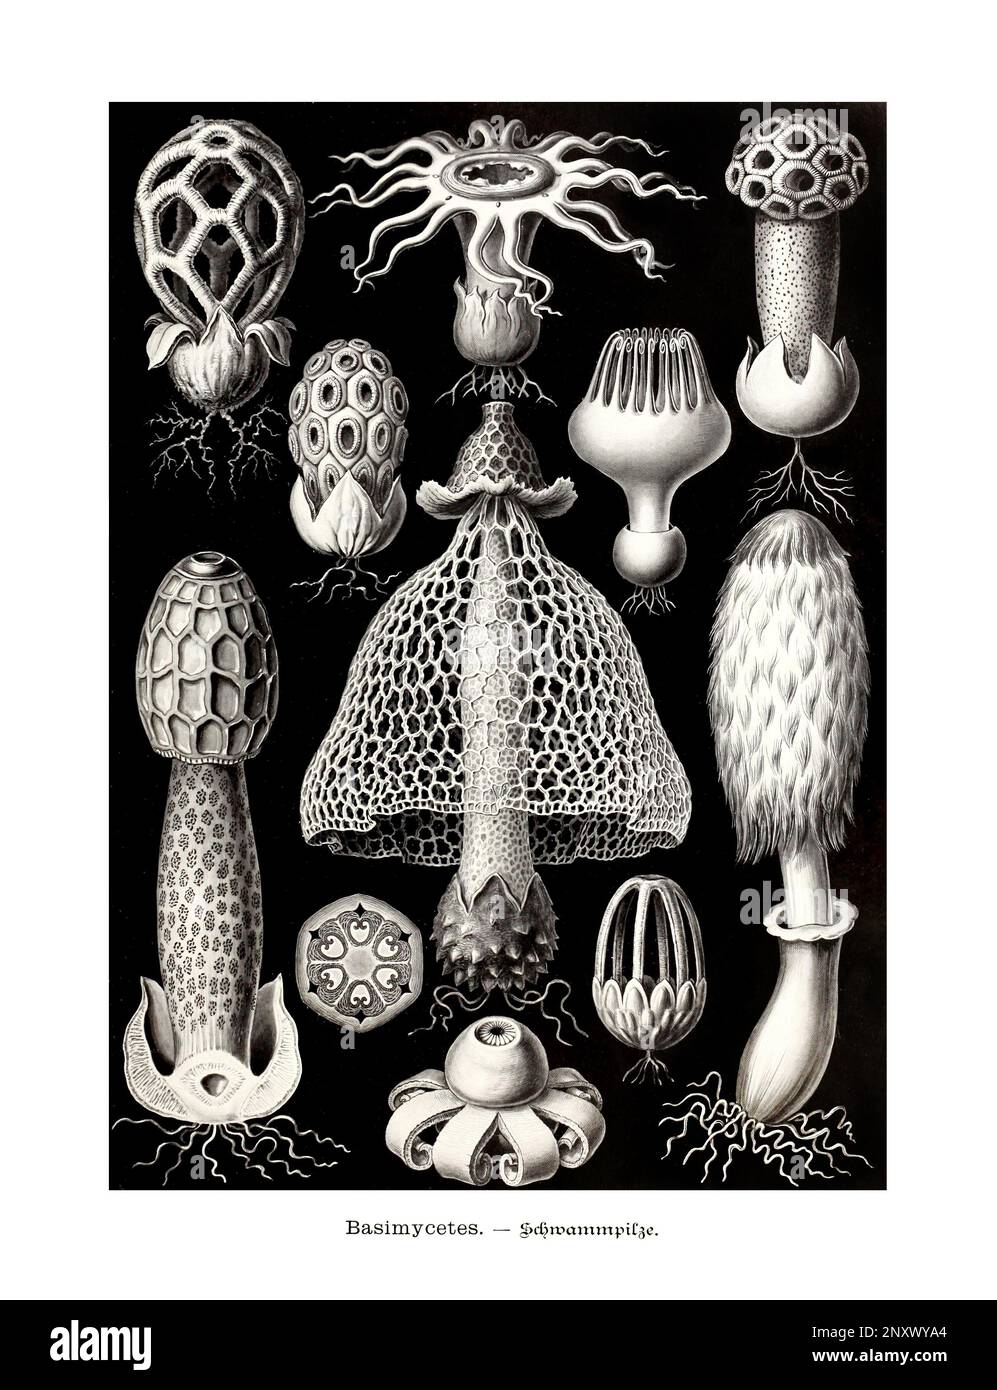 ERNST HAECKEL ART - Basimycetes - 19th Century - Antique Zoological illustration - Illustrations of the book : “Art Forms in Nature” Stock Photo